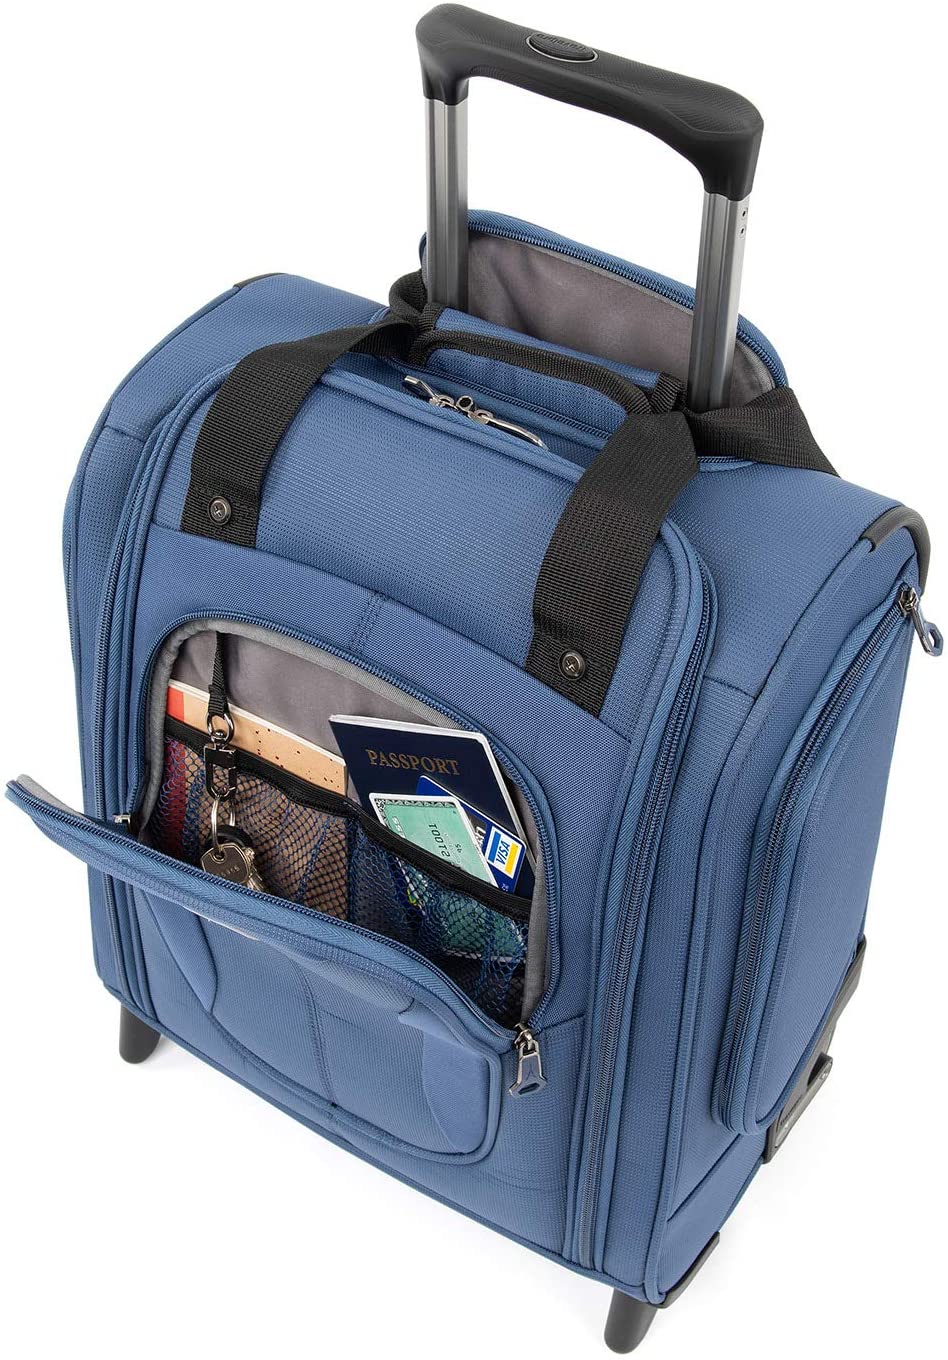 Travelpro TourLite Rolling UnderSeat Carry-on Blue